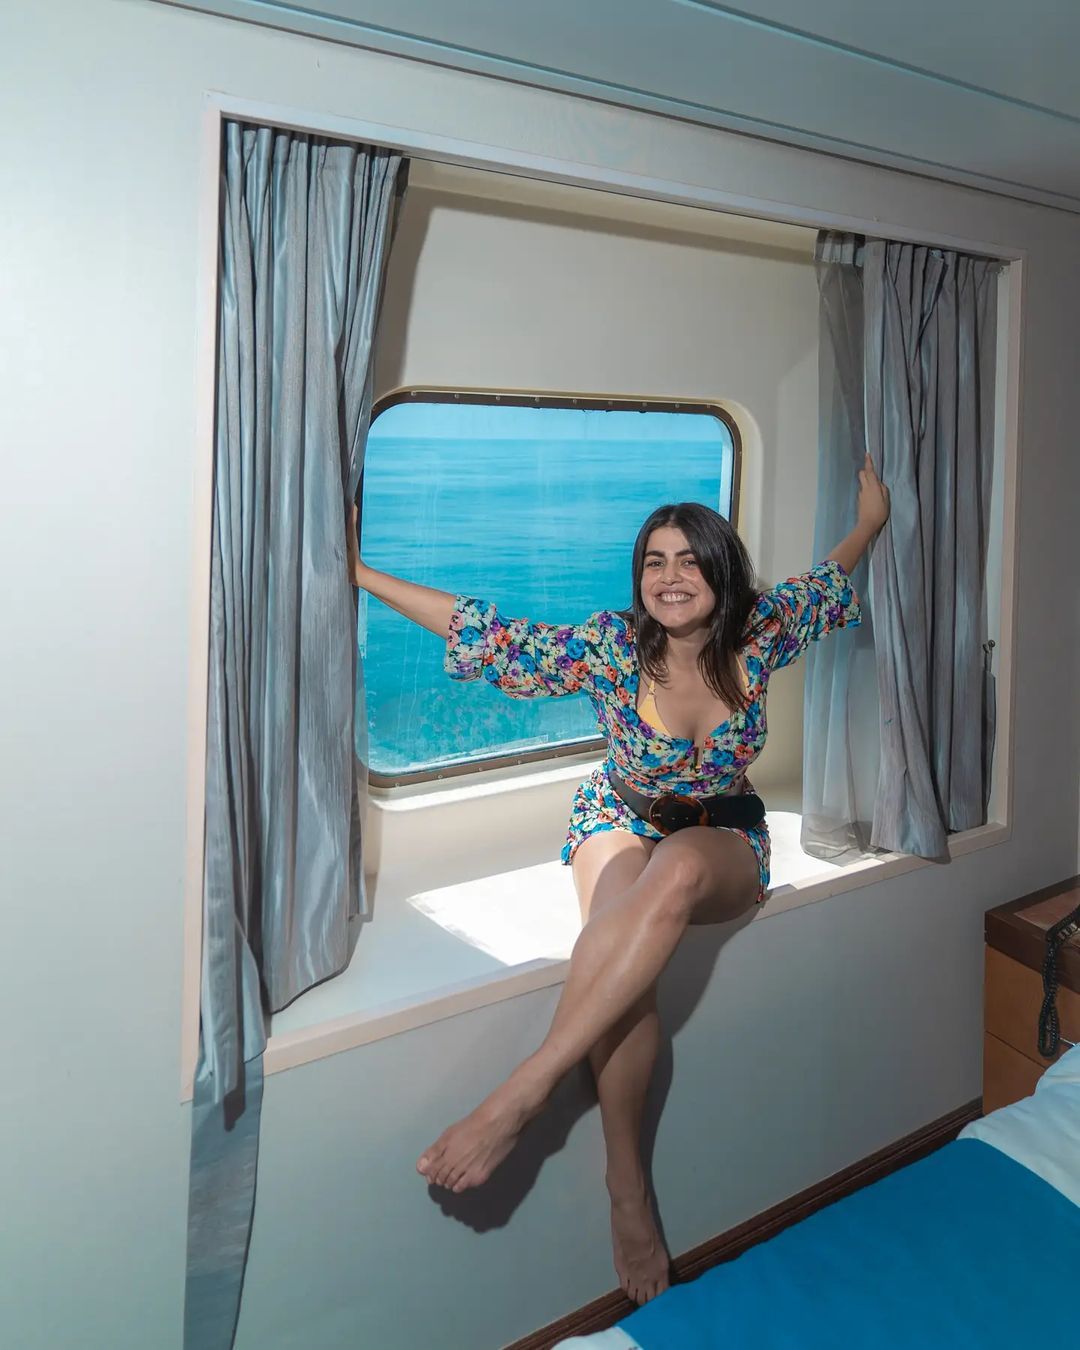 You may have seen it in news: Shenaz Treasury gives tour of Cordelia cruise ship